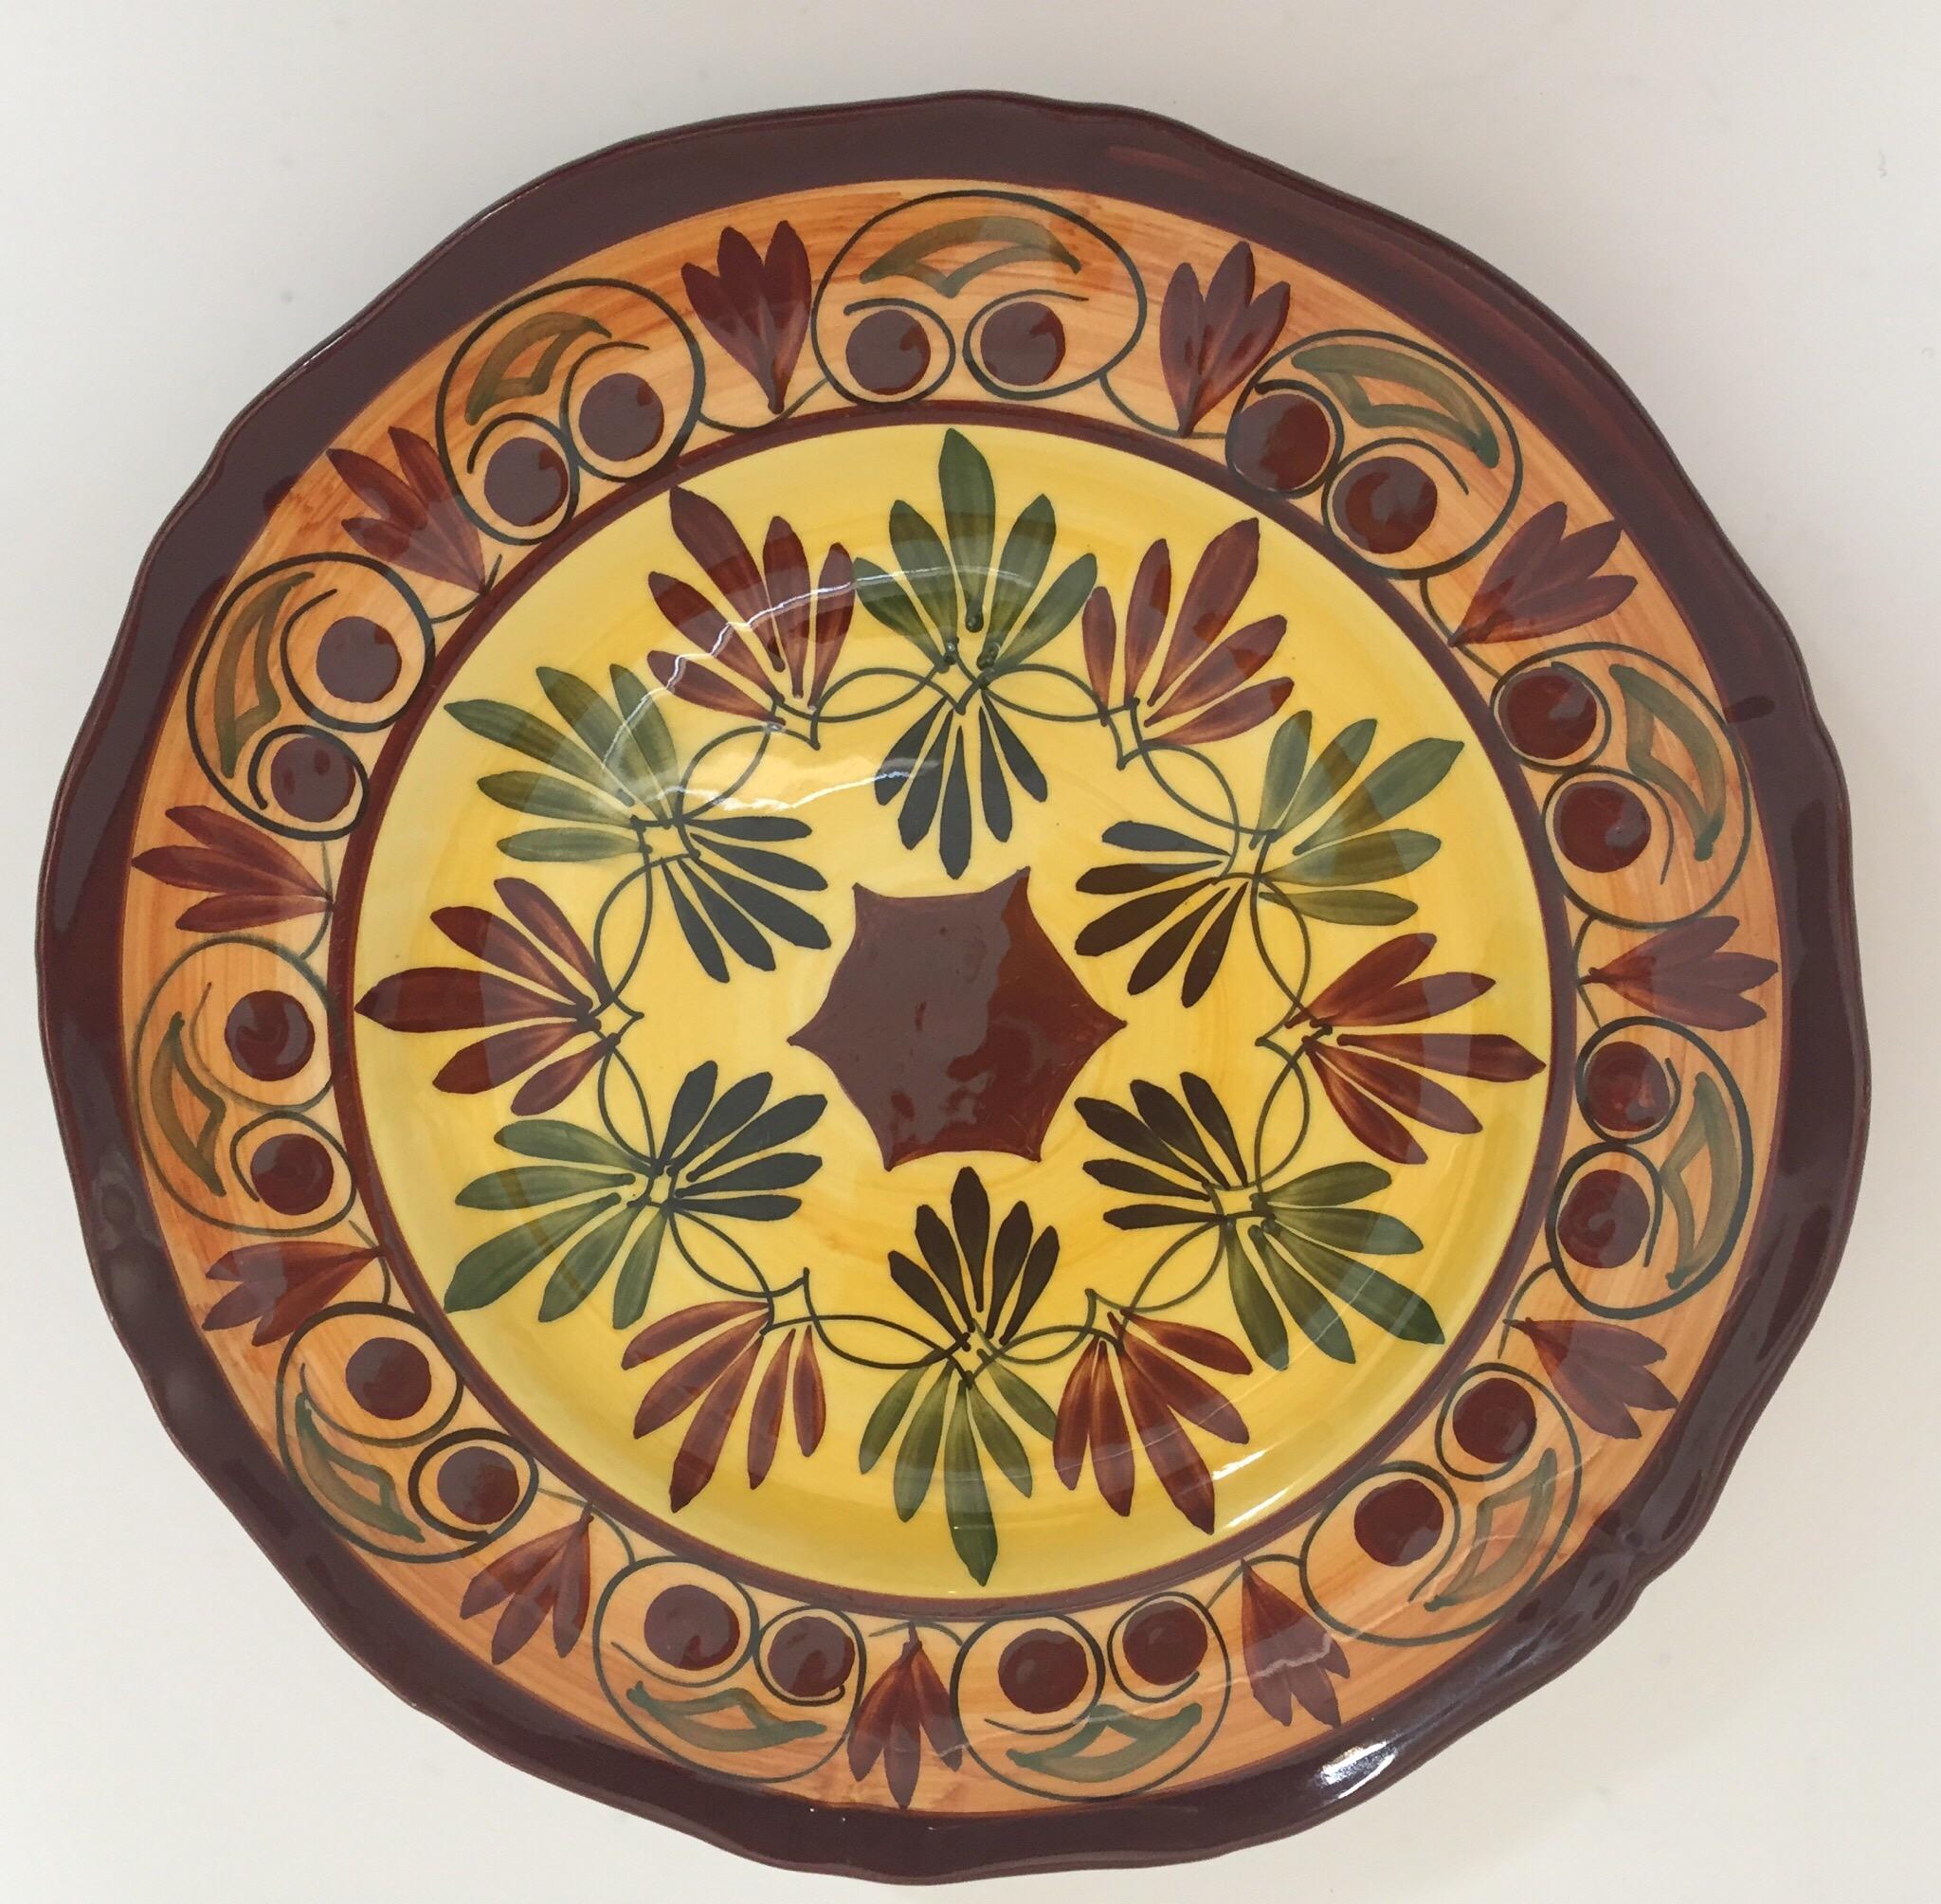 Polychrome hand painted and handcrafted ceramic wall decorative plate with polychrome floral design. 
It has a beautifully hand painted flowers in burgundy, yellow and green foliage. 
The back of the plate is signed. 
